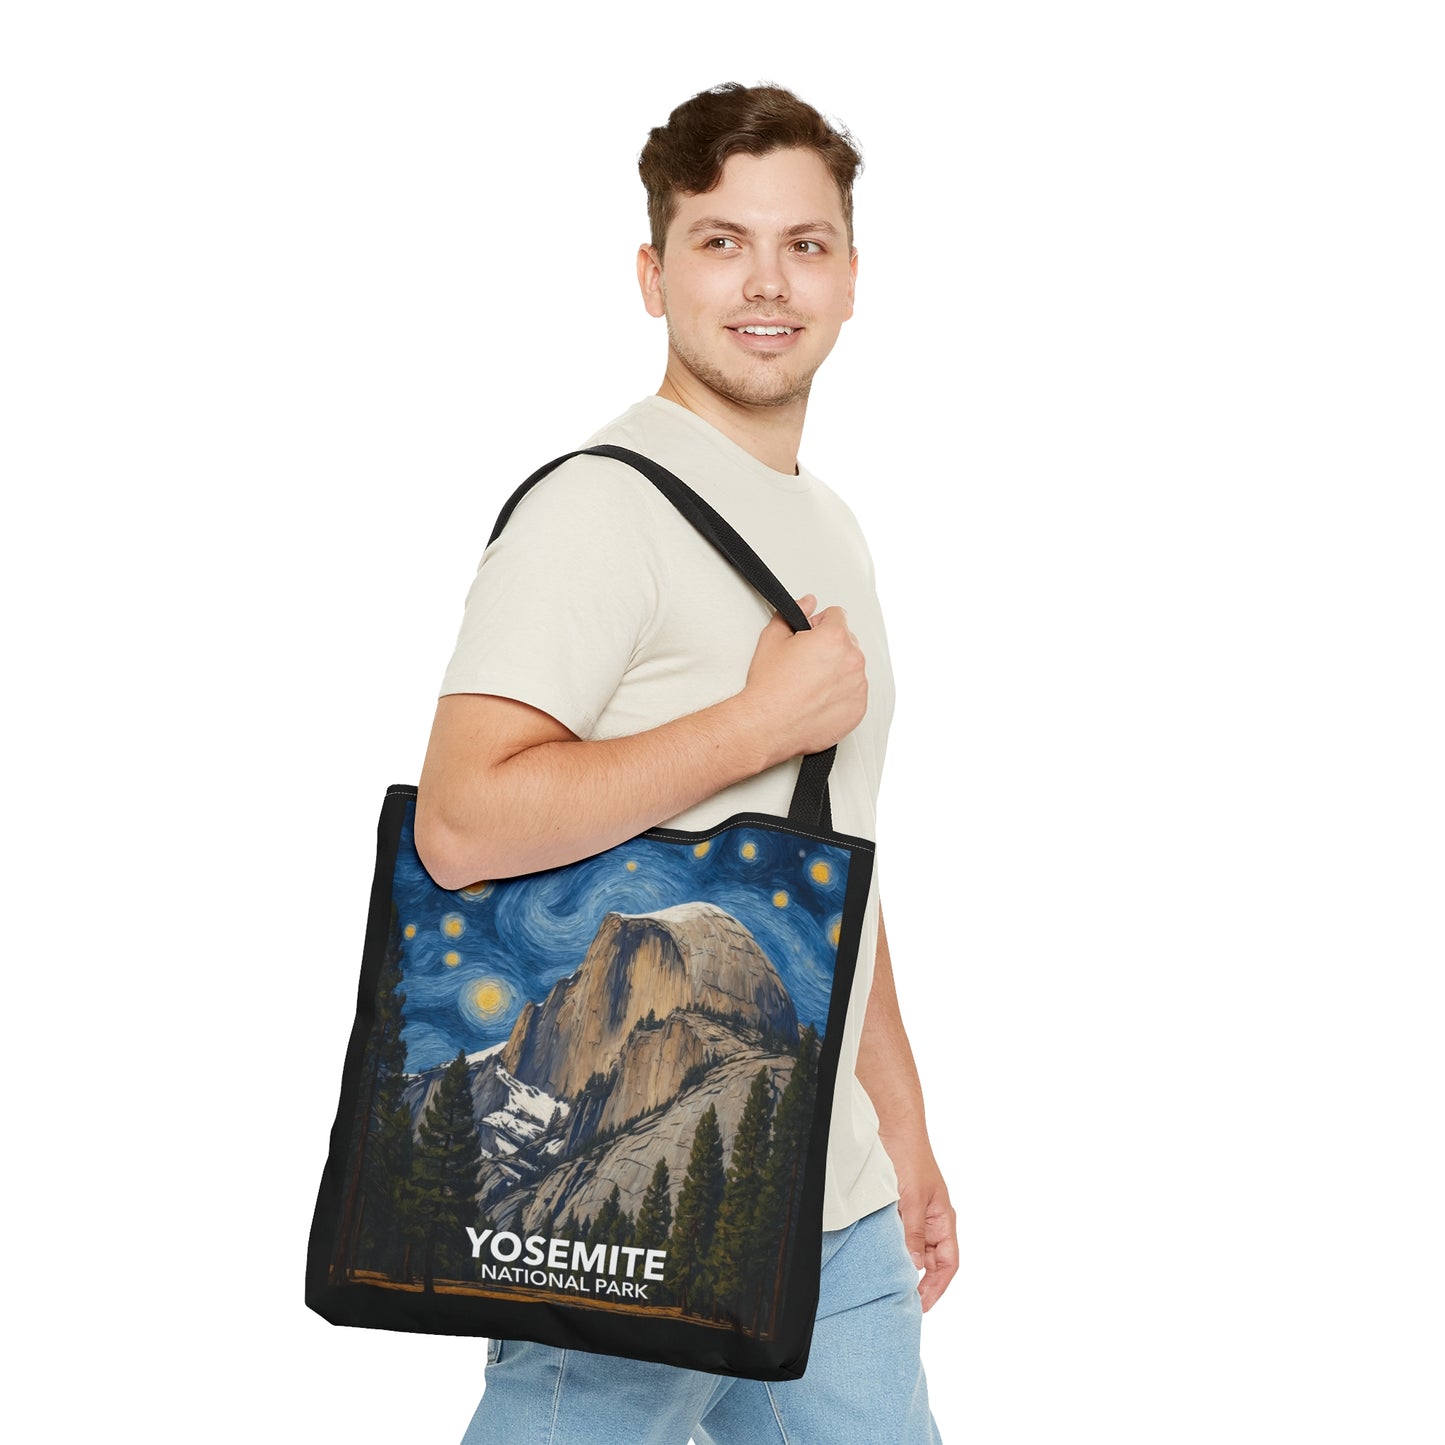 Yosemite National Park Tote Bag - The Starry Night